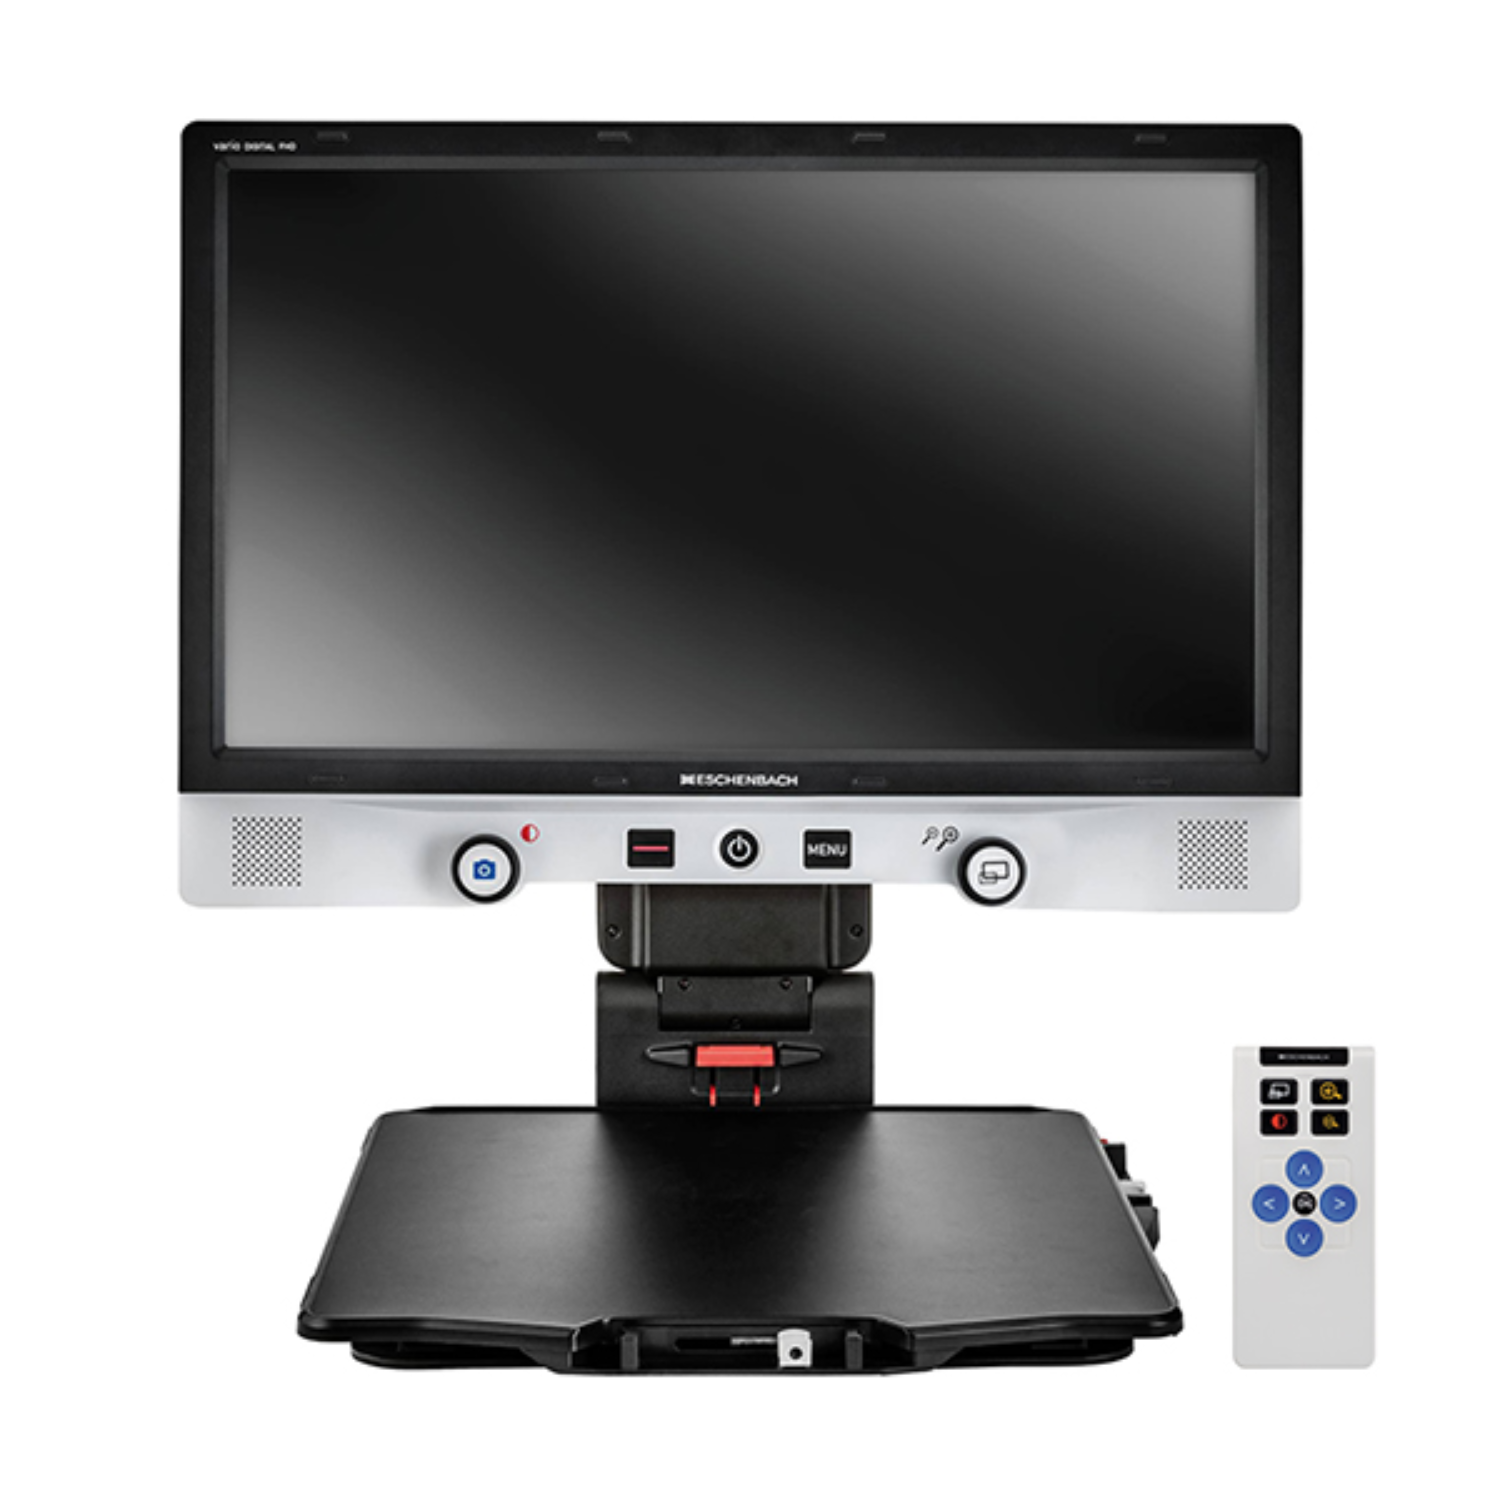 Image of  a Vario Digital 22 FHD Advanced desktop CCTV video magnifier from Eschenbach Optik with the optional XY table and external battery.